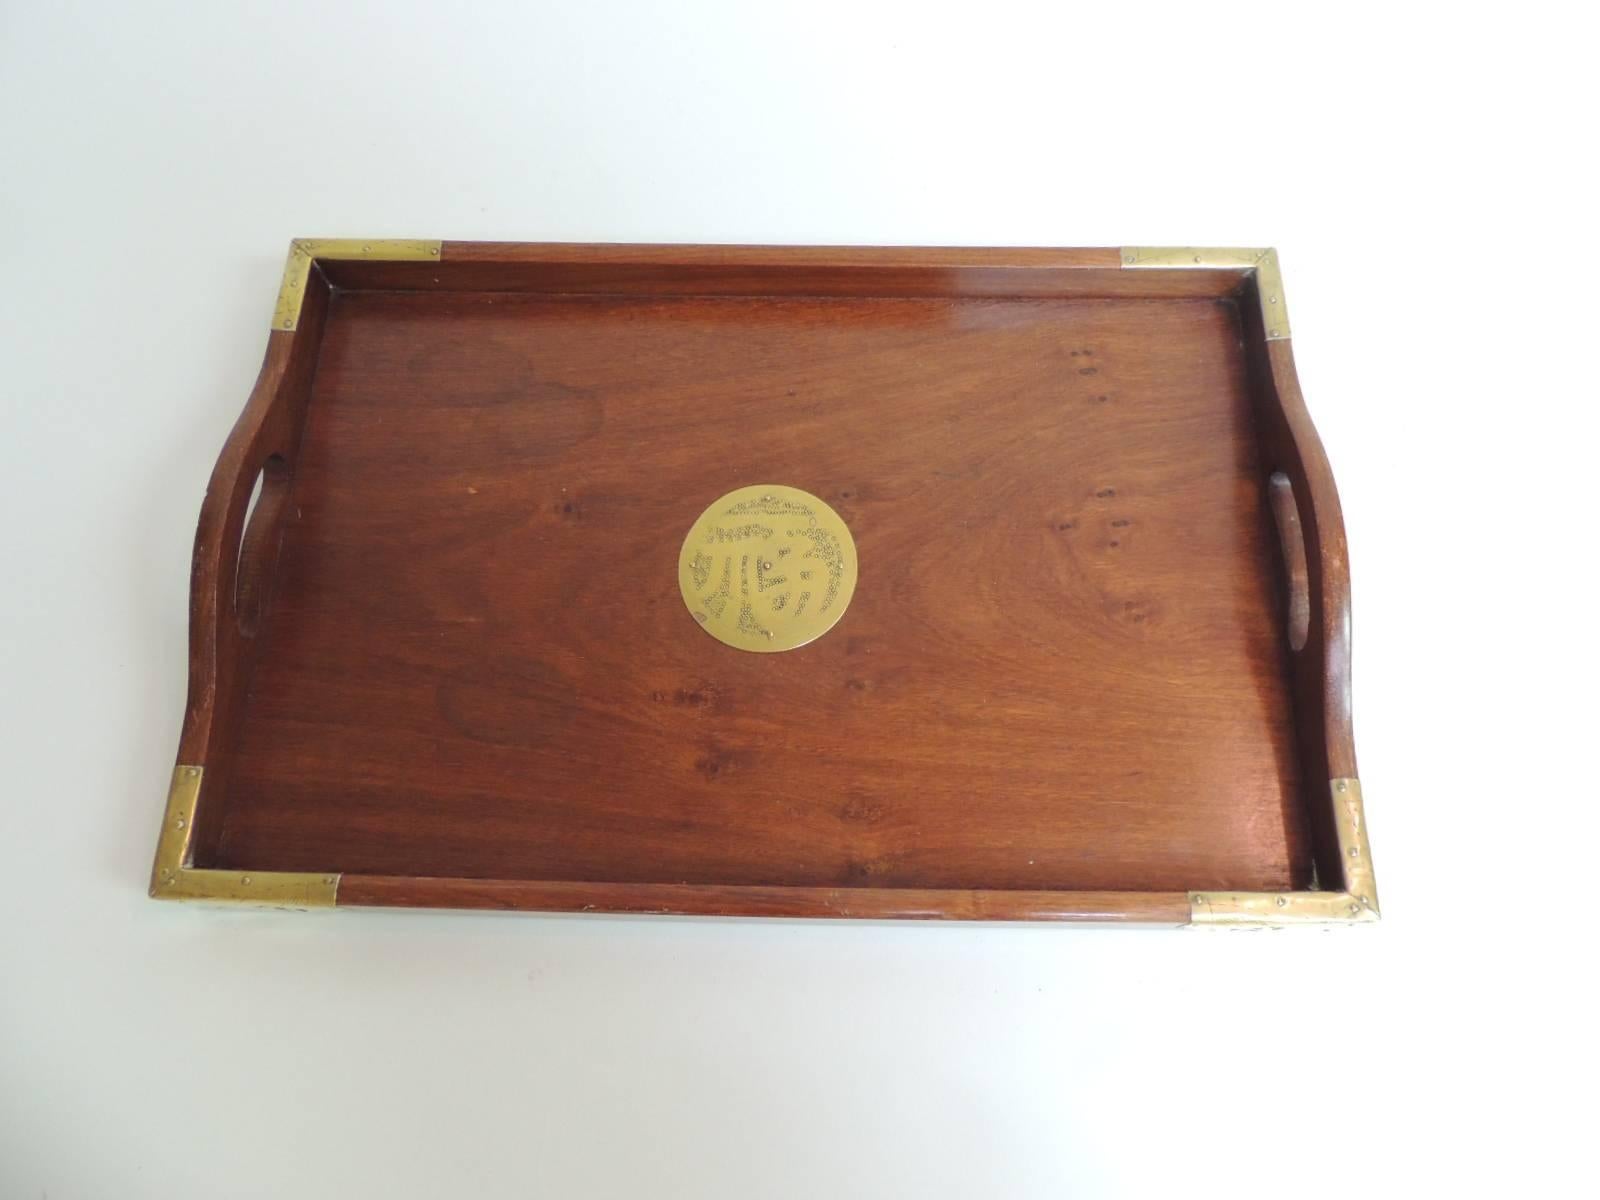 Vintage Asian serving tray with brass details
Wood rectangular Asian tray with centre brass medallion and brass fittings on the corners.
Two open handles on both sides.
Size: 11.5 x 17.5 x 2.
       